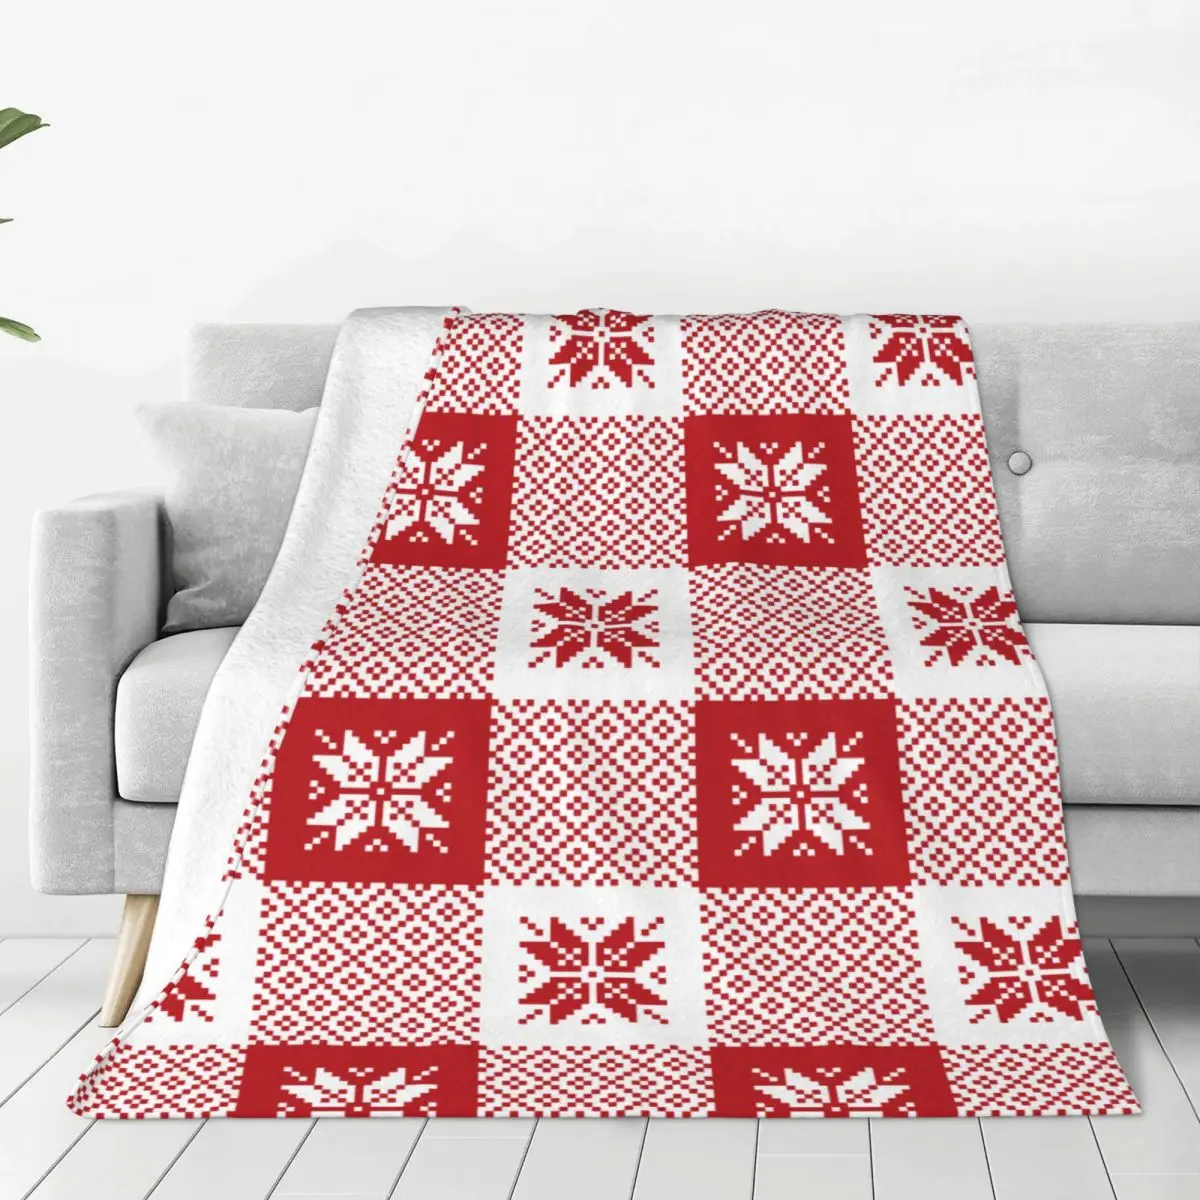 

Christmas Nordic Buffalo Check Plaid In Red And White Blanket Flannel Spring/Autumn Throw Blanket for Home Couch Bedding Throws